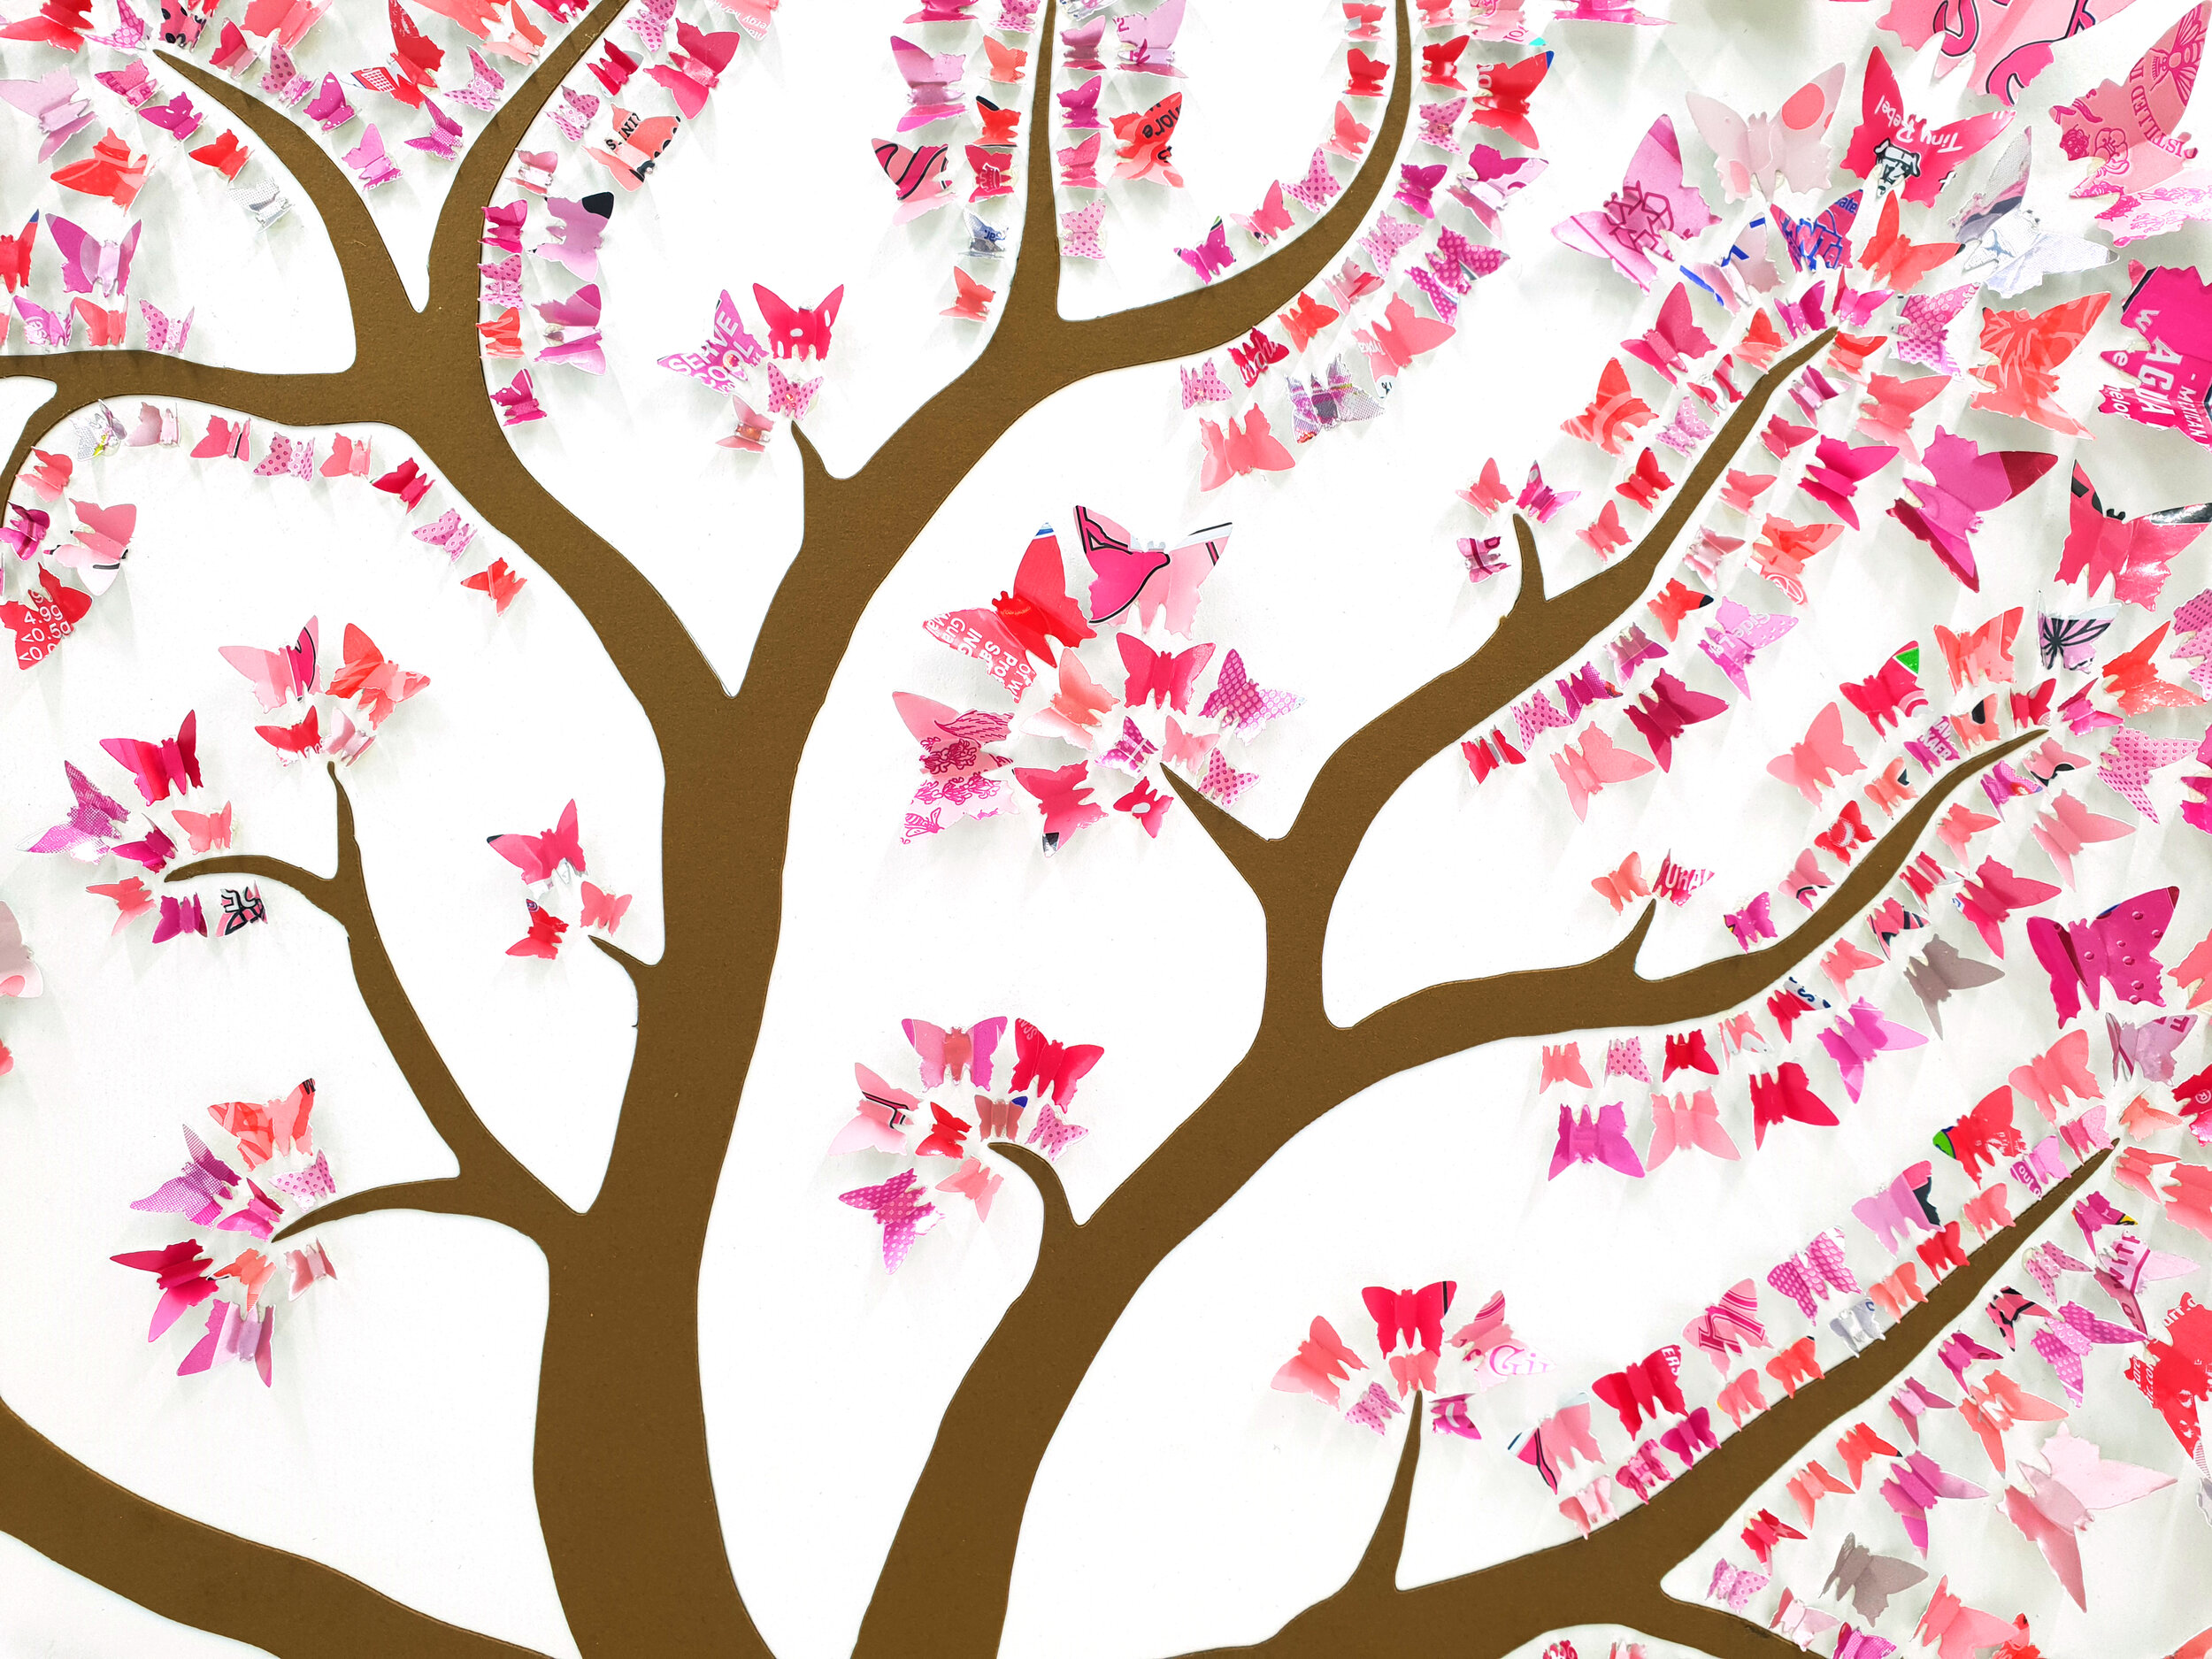 Spring Butterfly Tree pink upcycled can sustainable art 